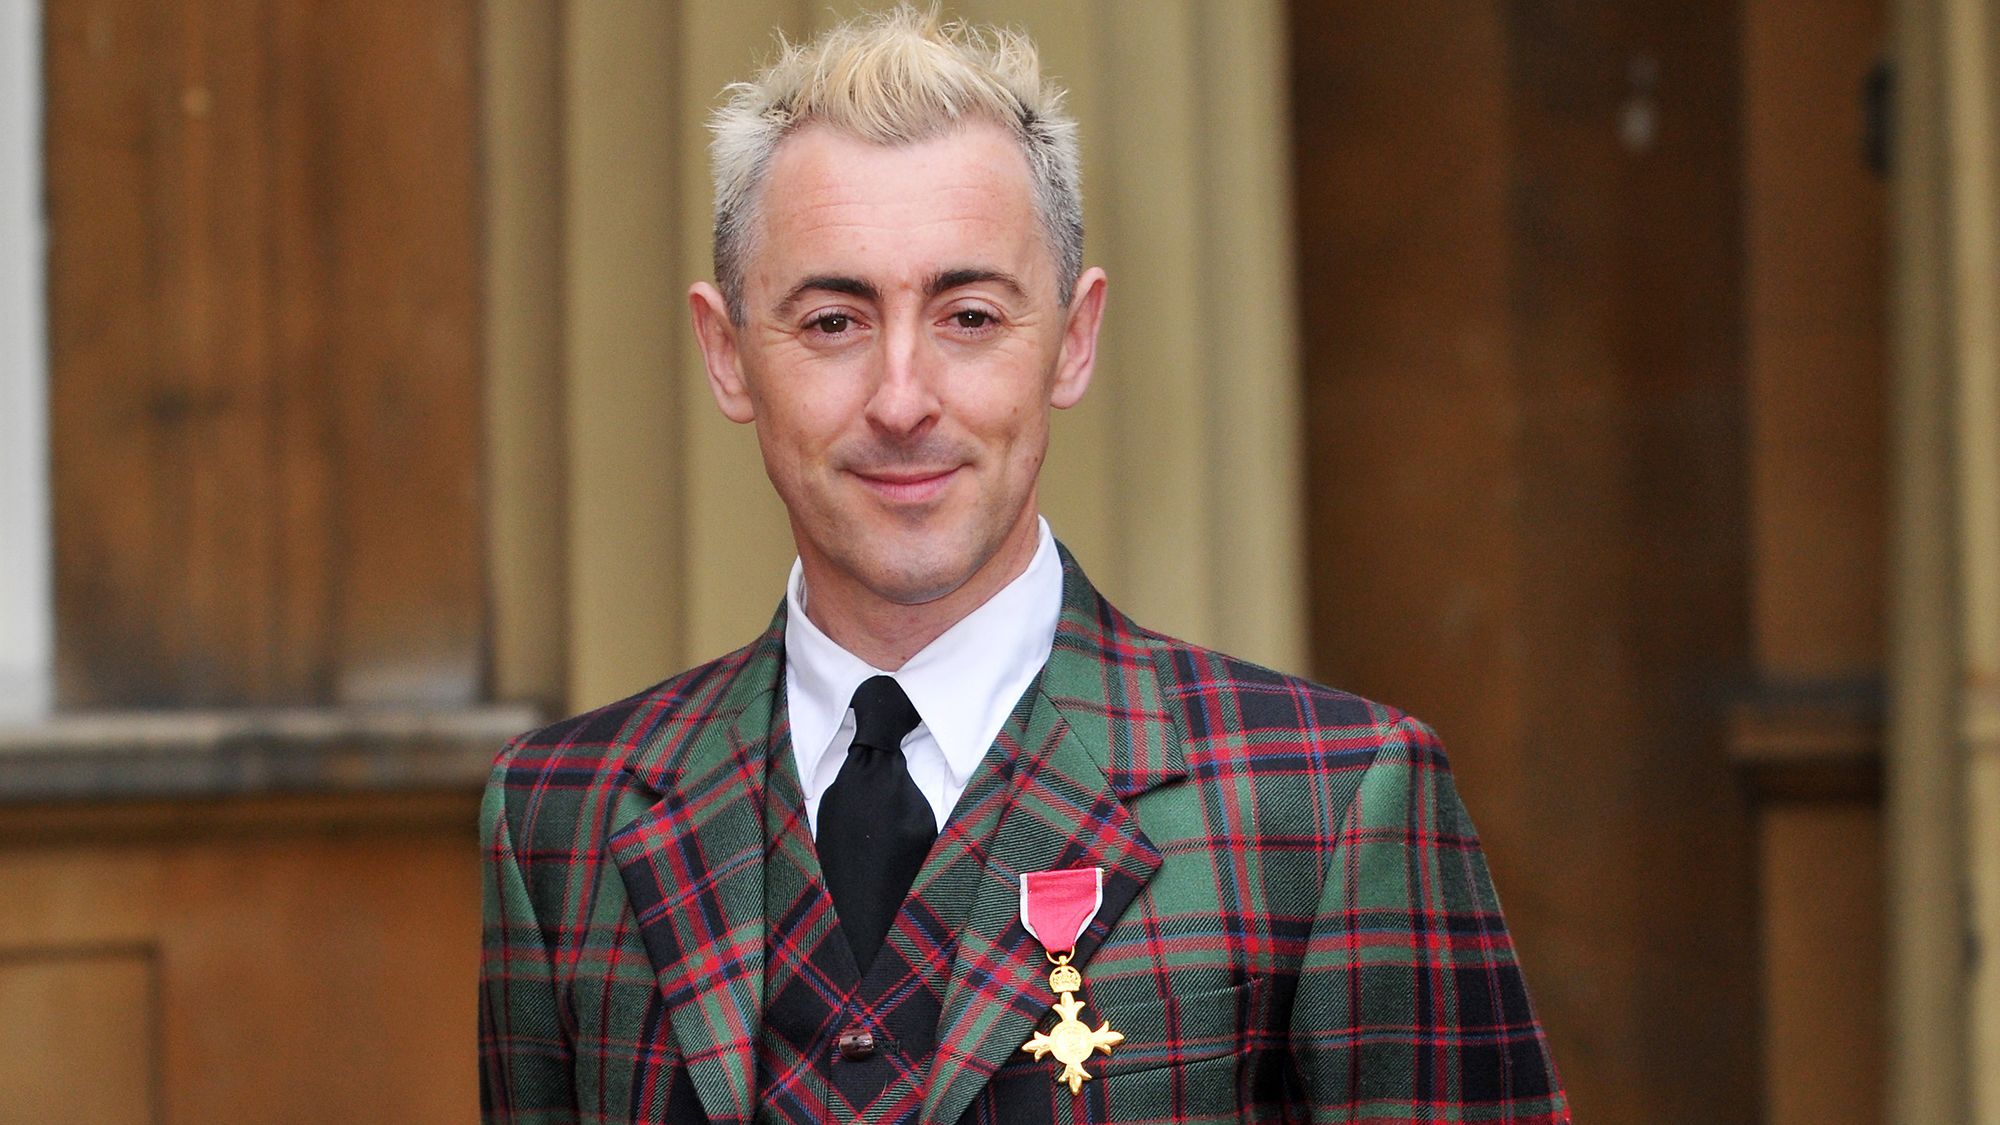 Alan Cumming Returns His OBE Due to the Toxicity of Empire